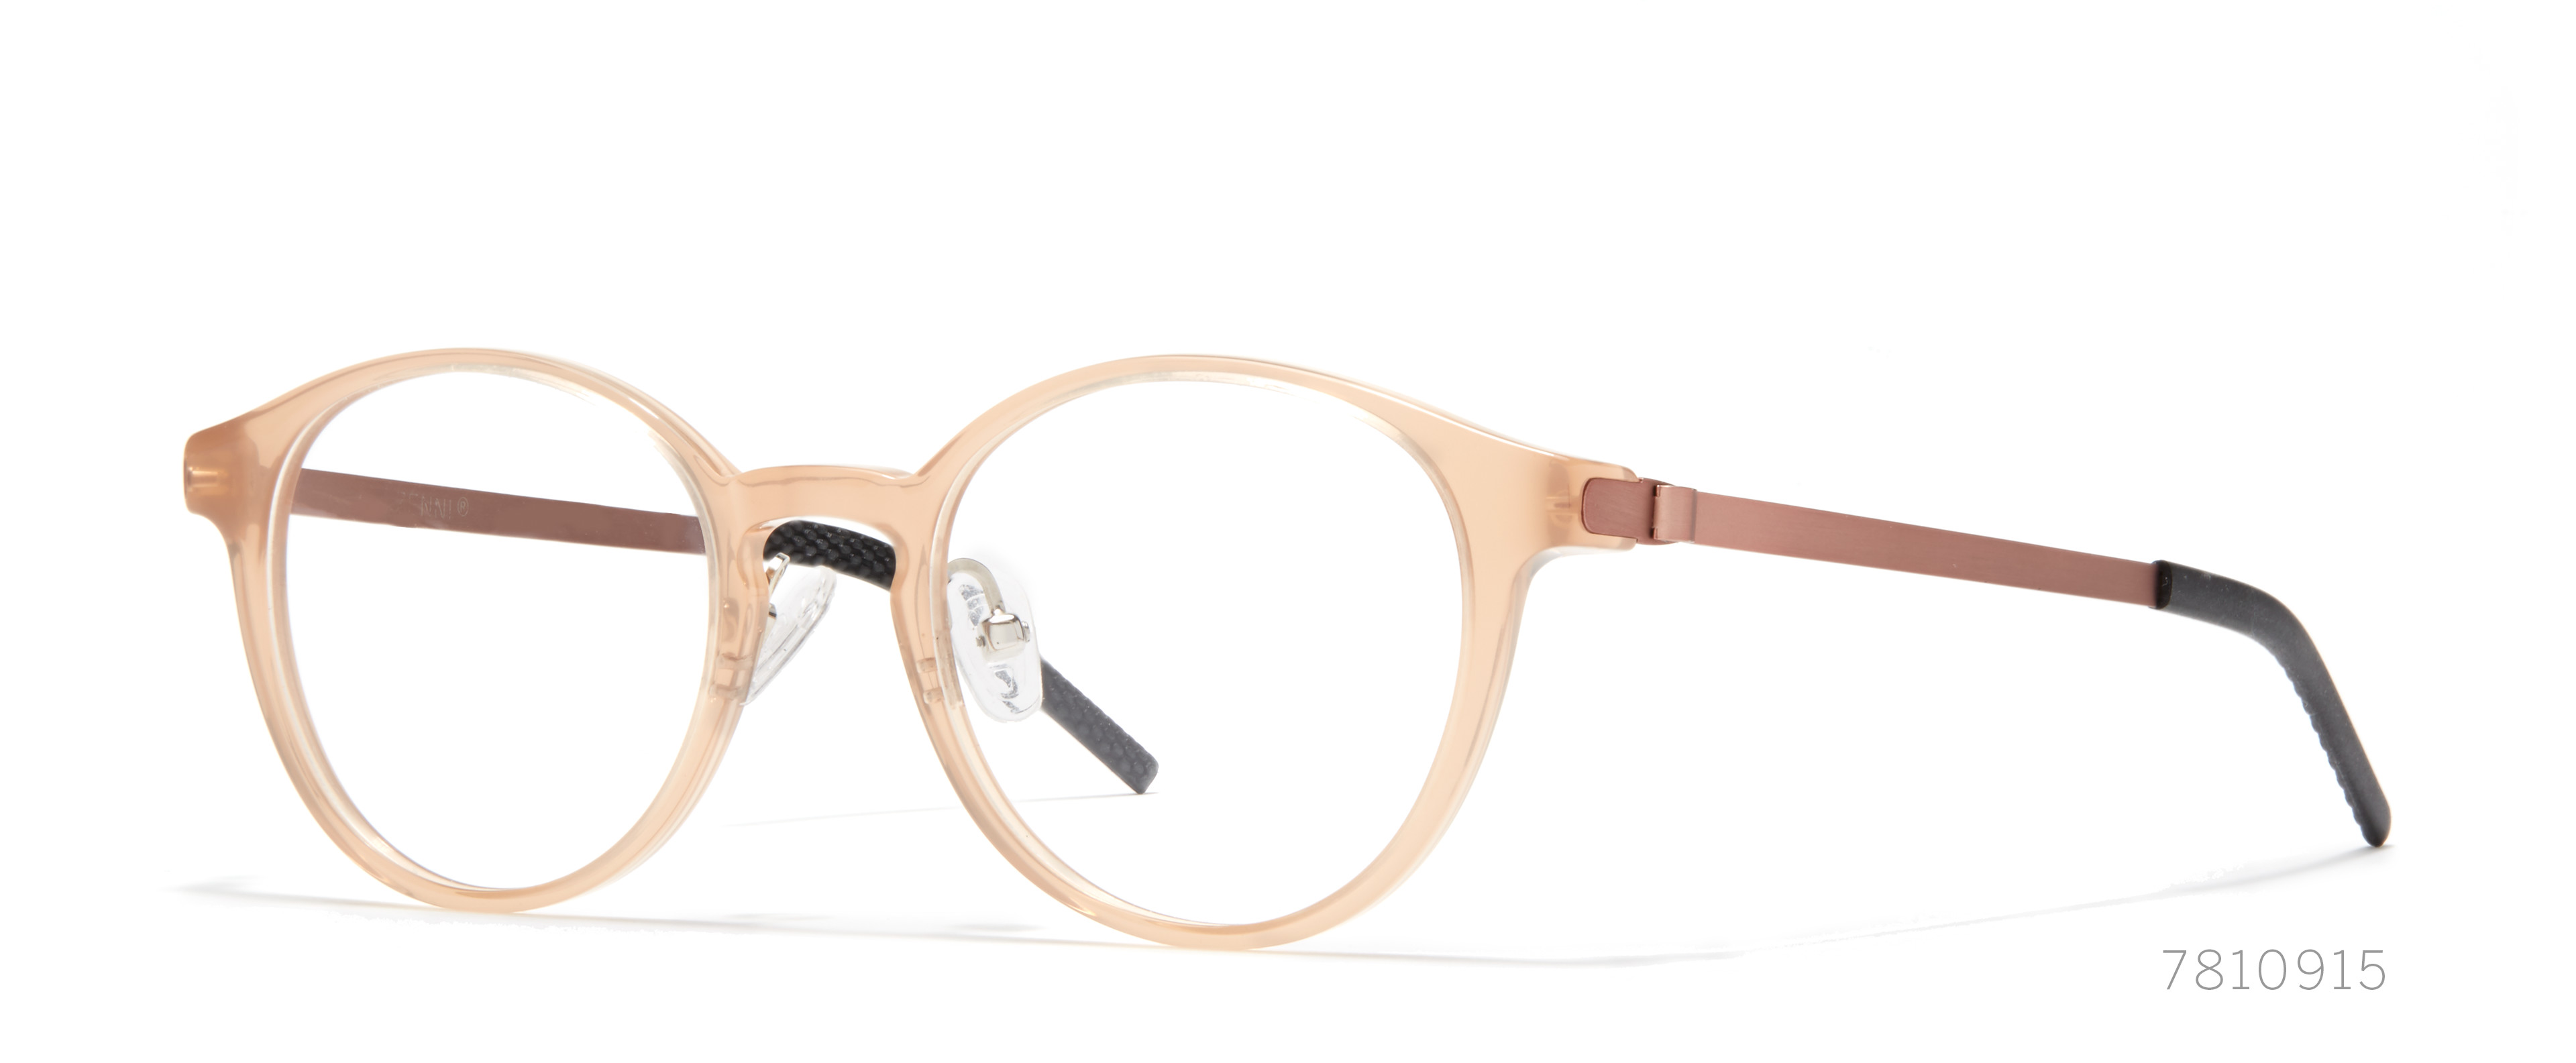 5 Best Glasses For A Heart Shaped Face.